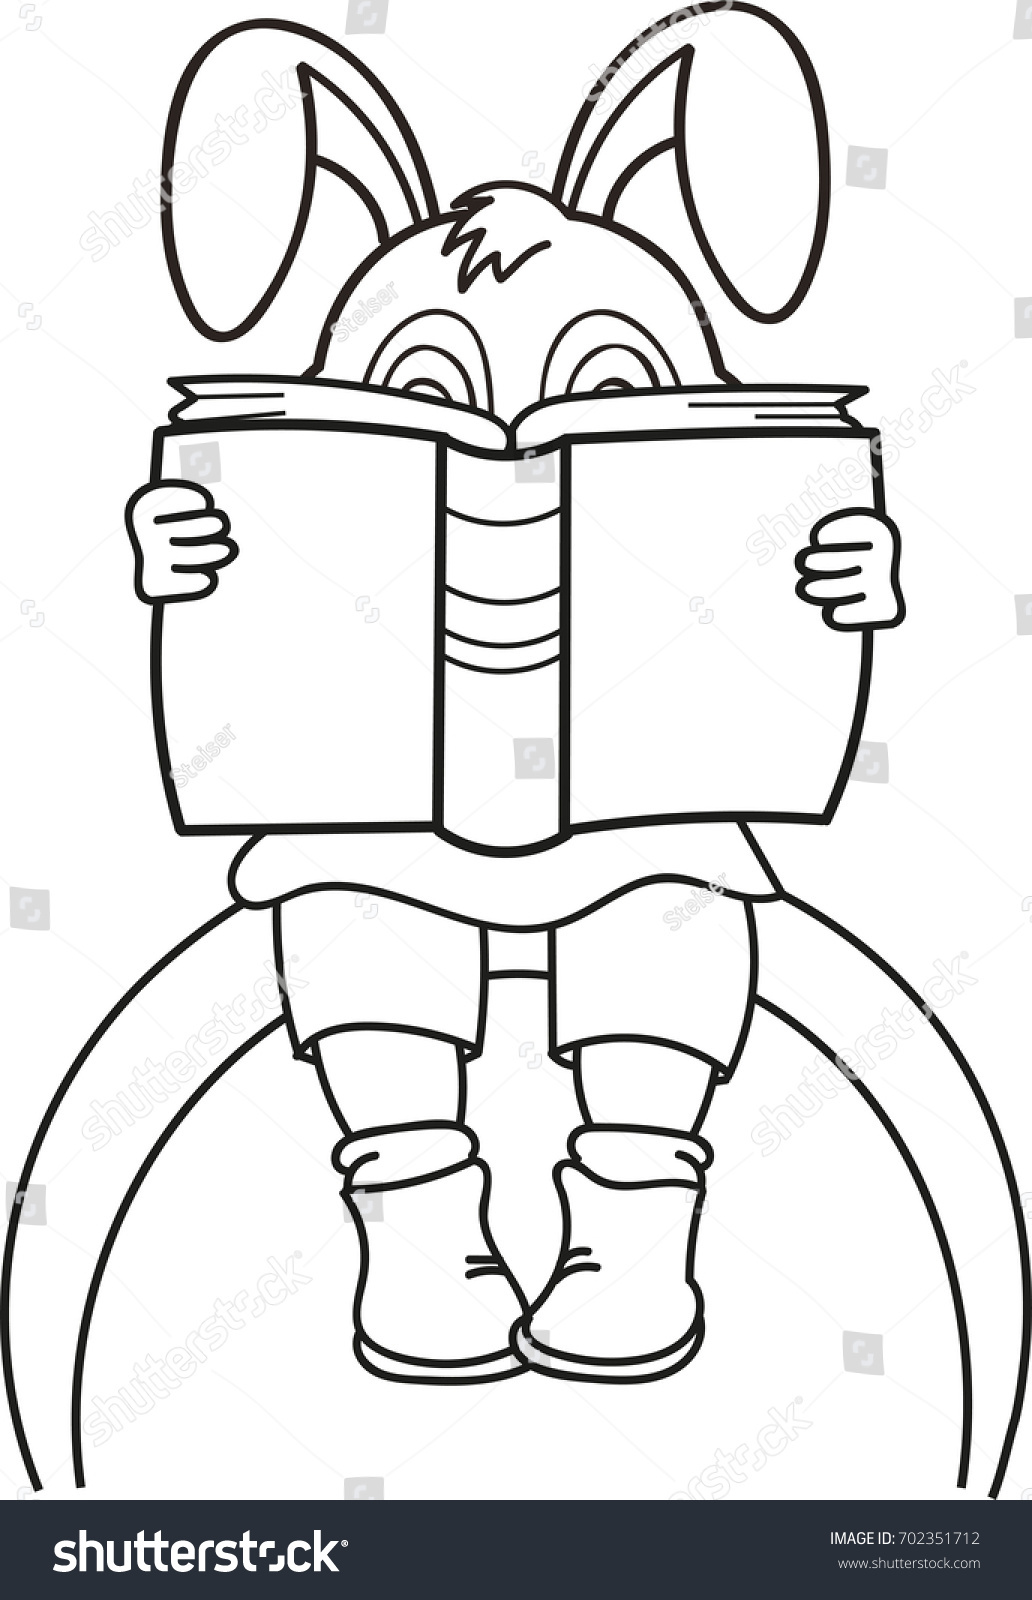 Coloring page outline of cartoon bunny is reading the book at school Vector illustration